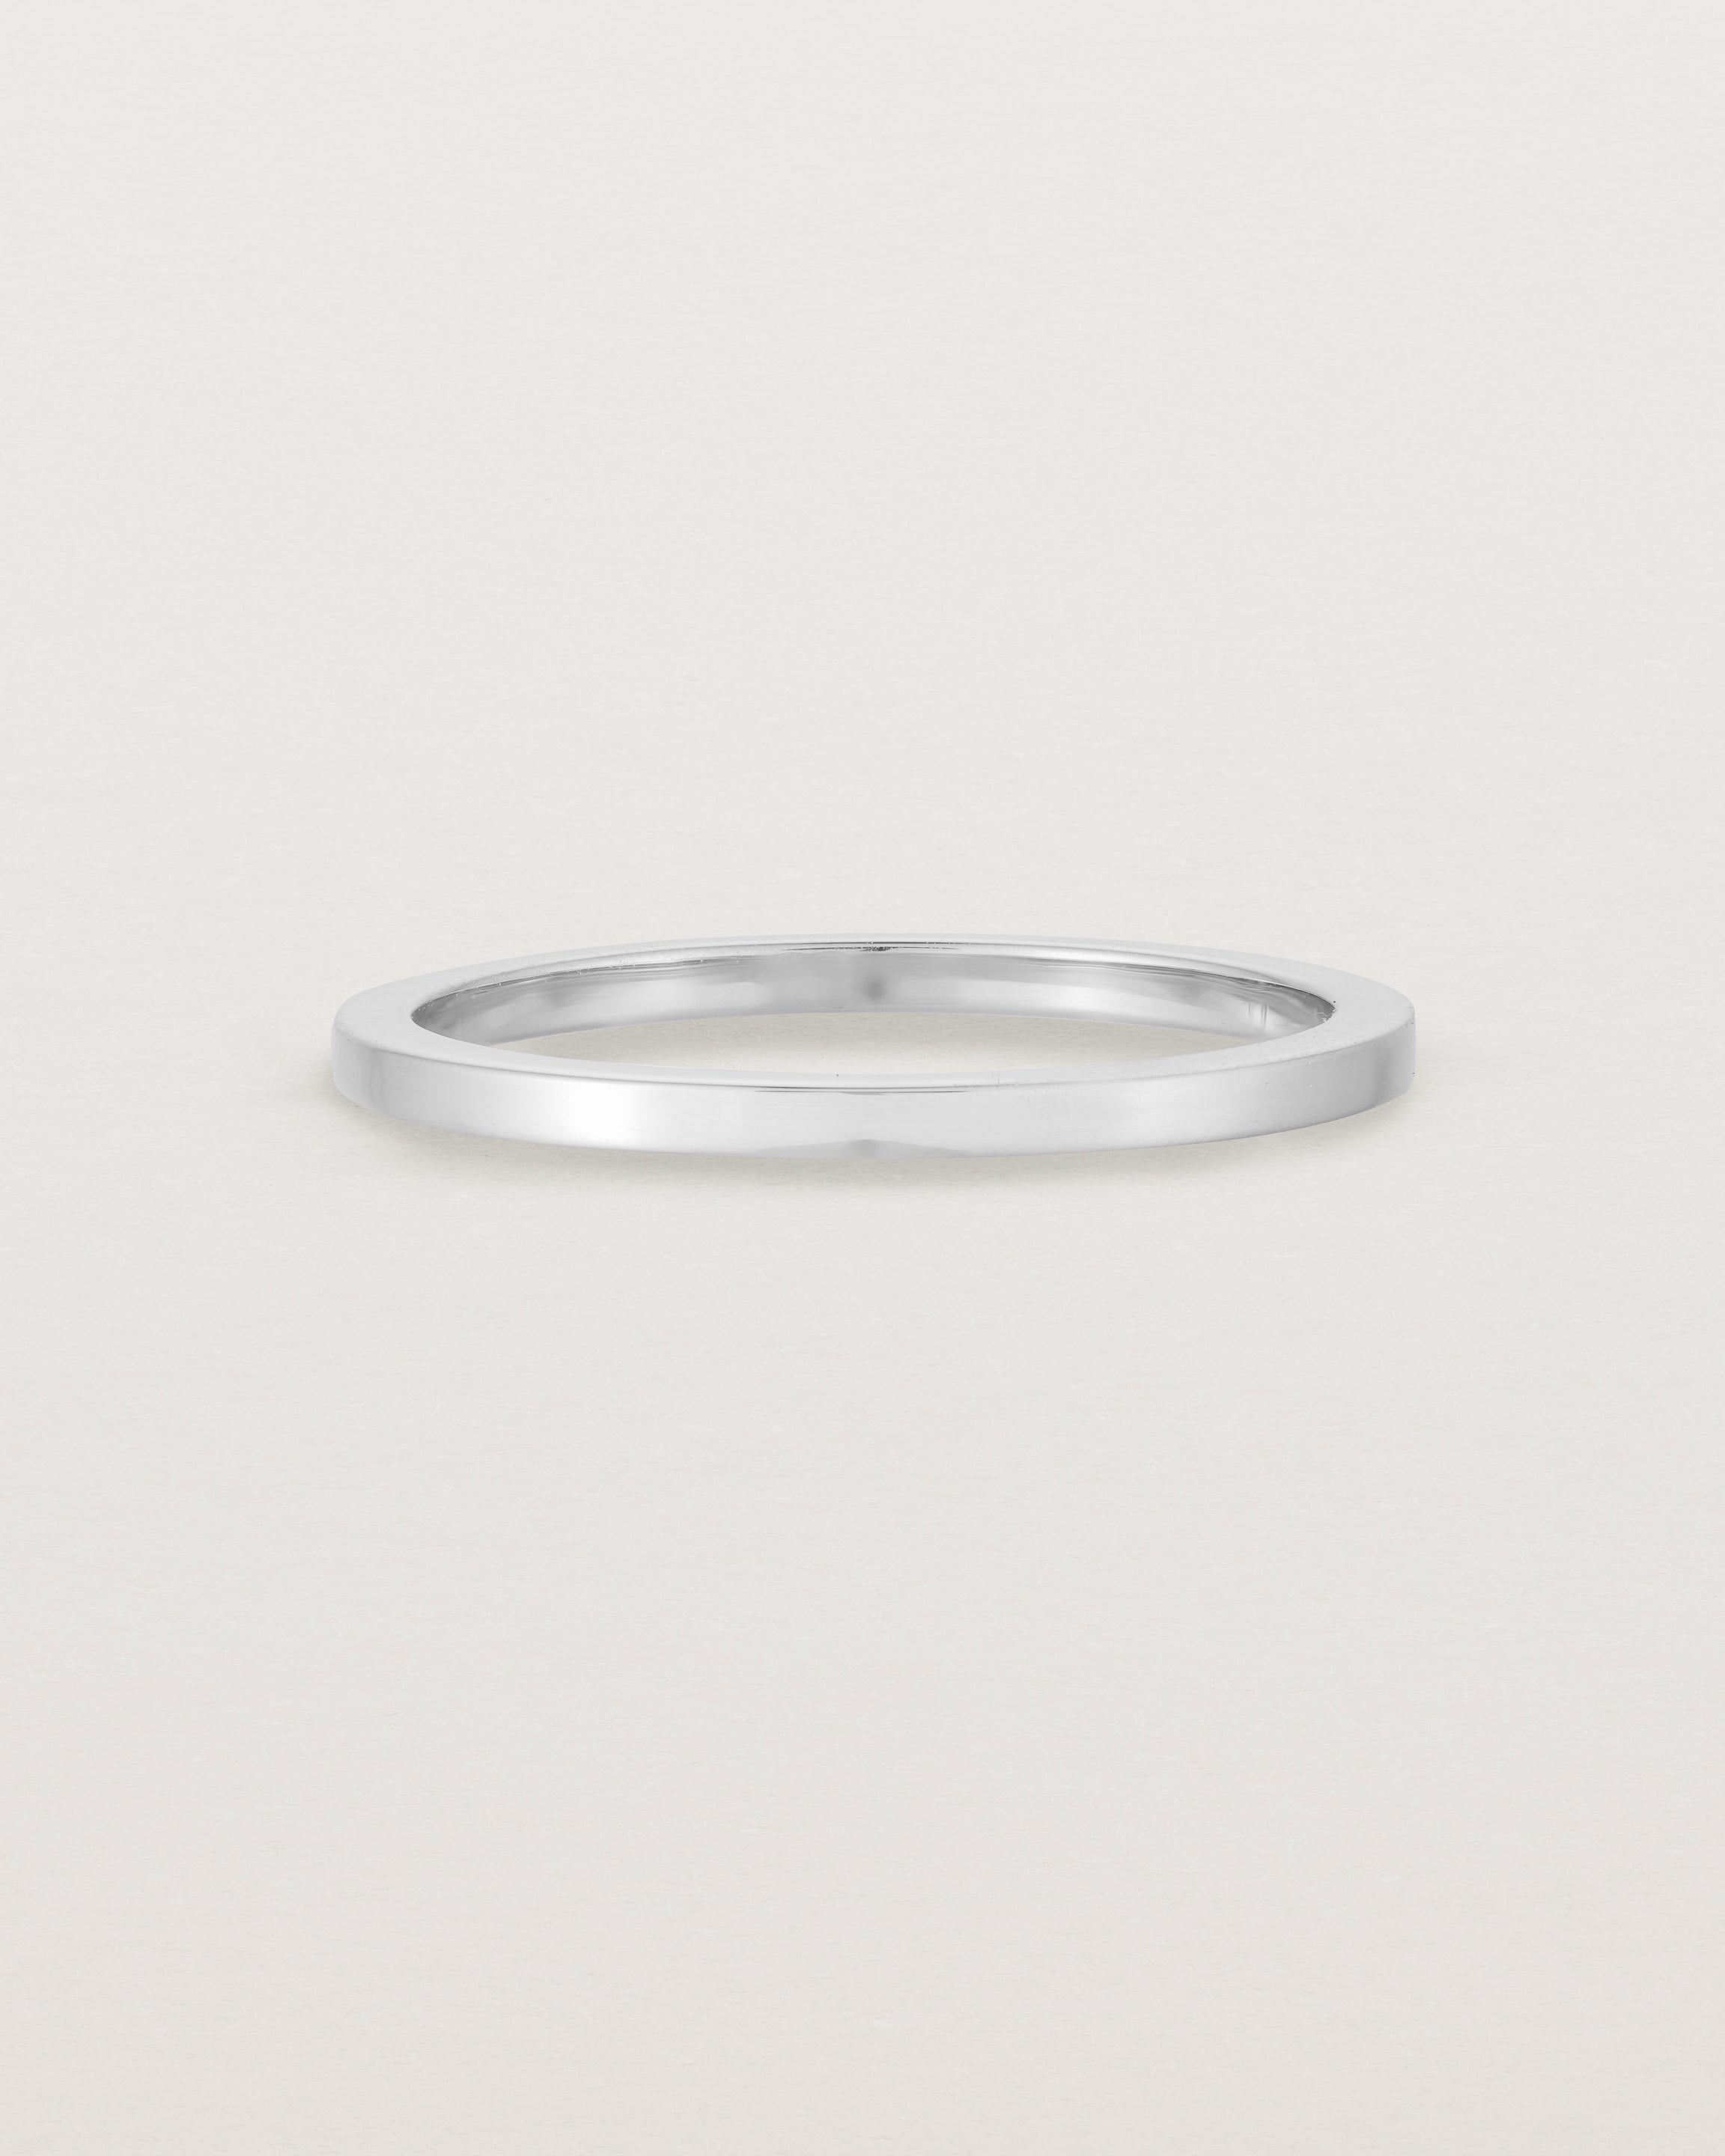 Our 1.5mm square wedding band in white gold